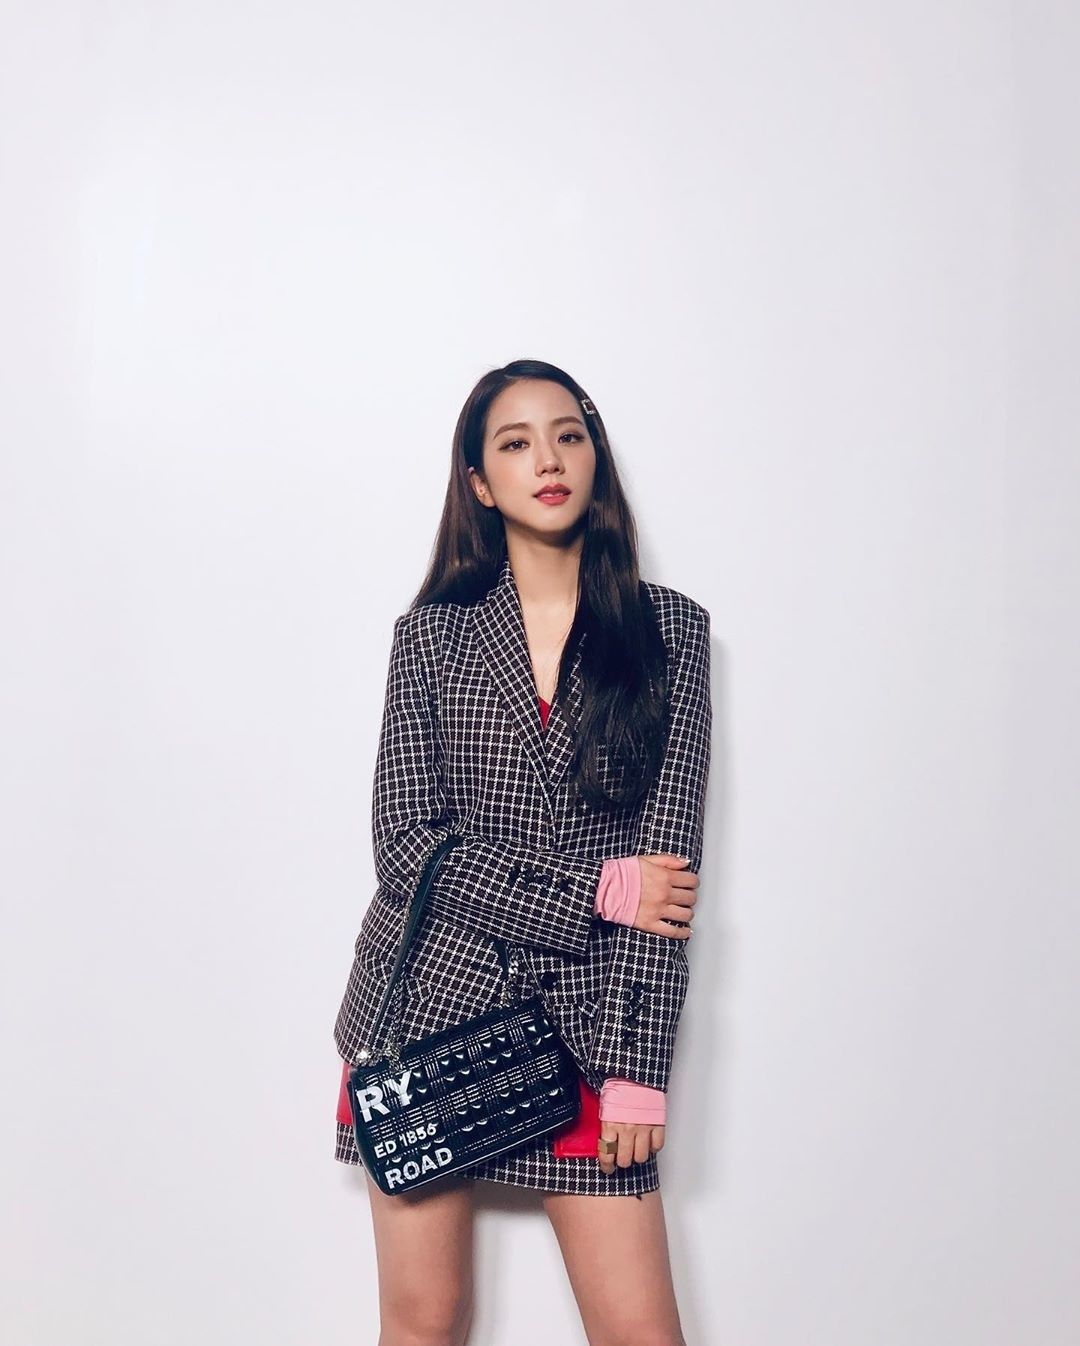 Jisoo Attends Burberry Spring 2020 